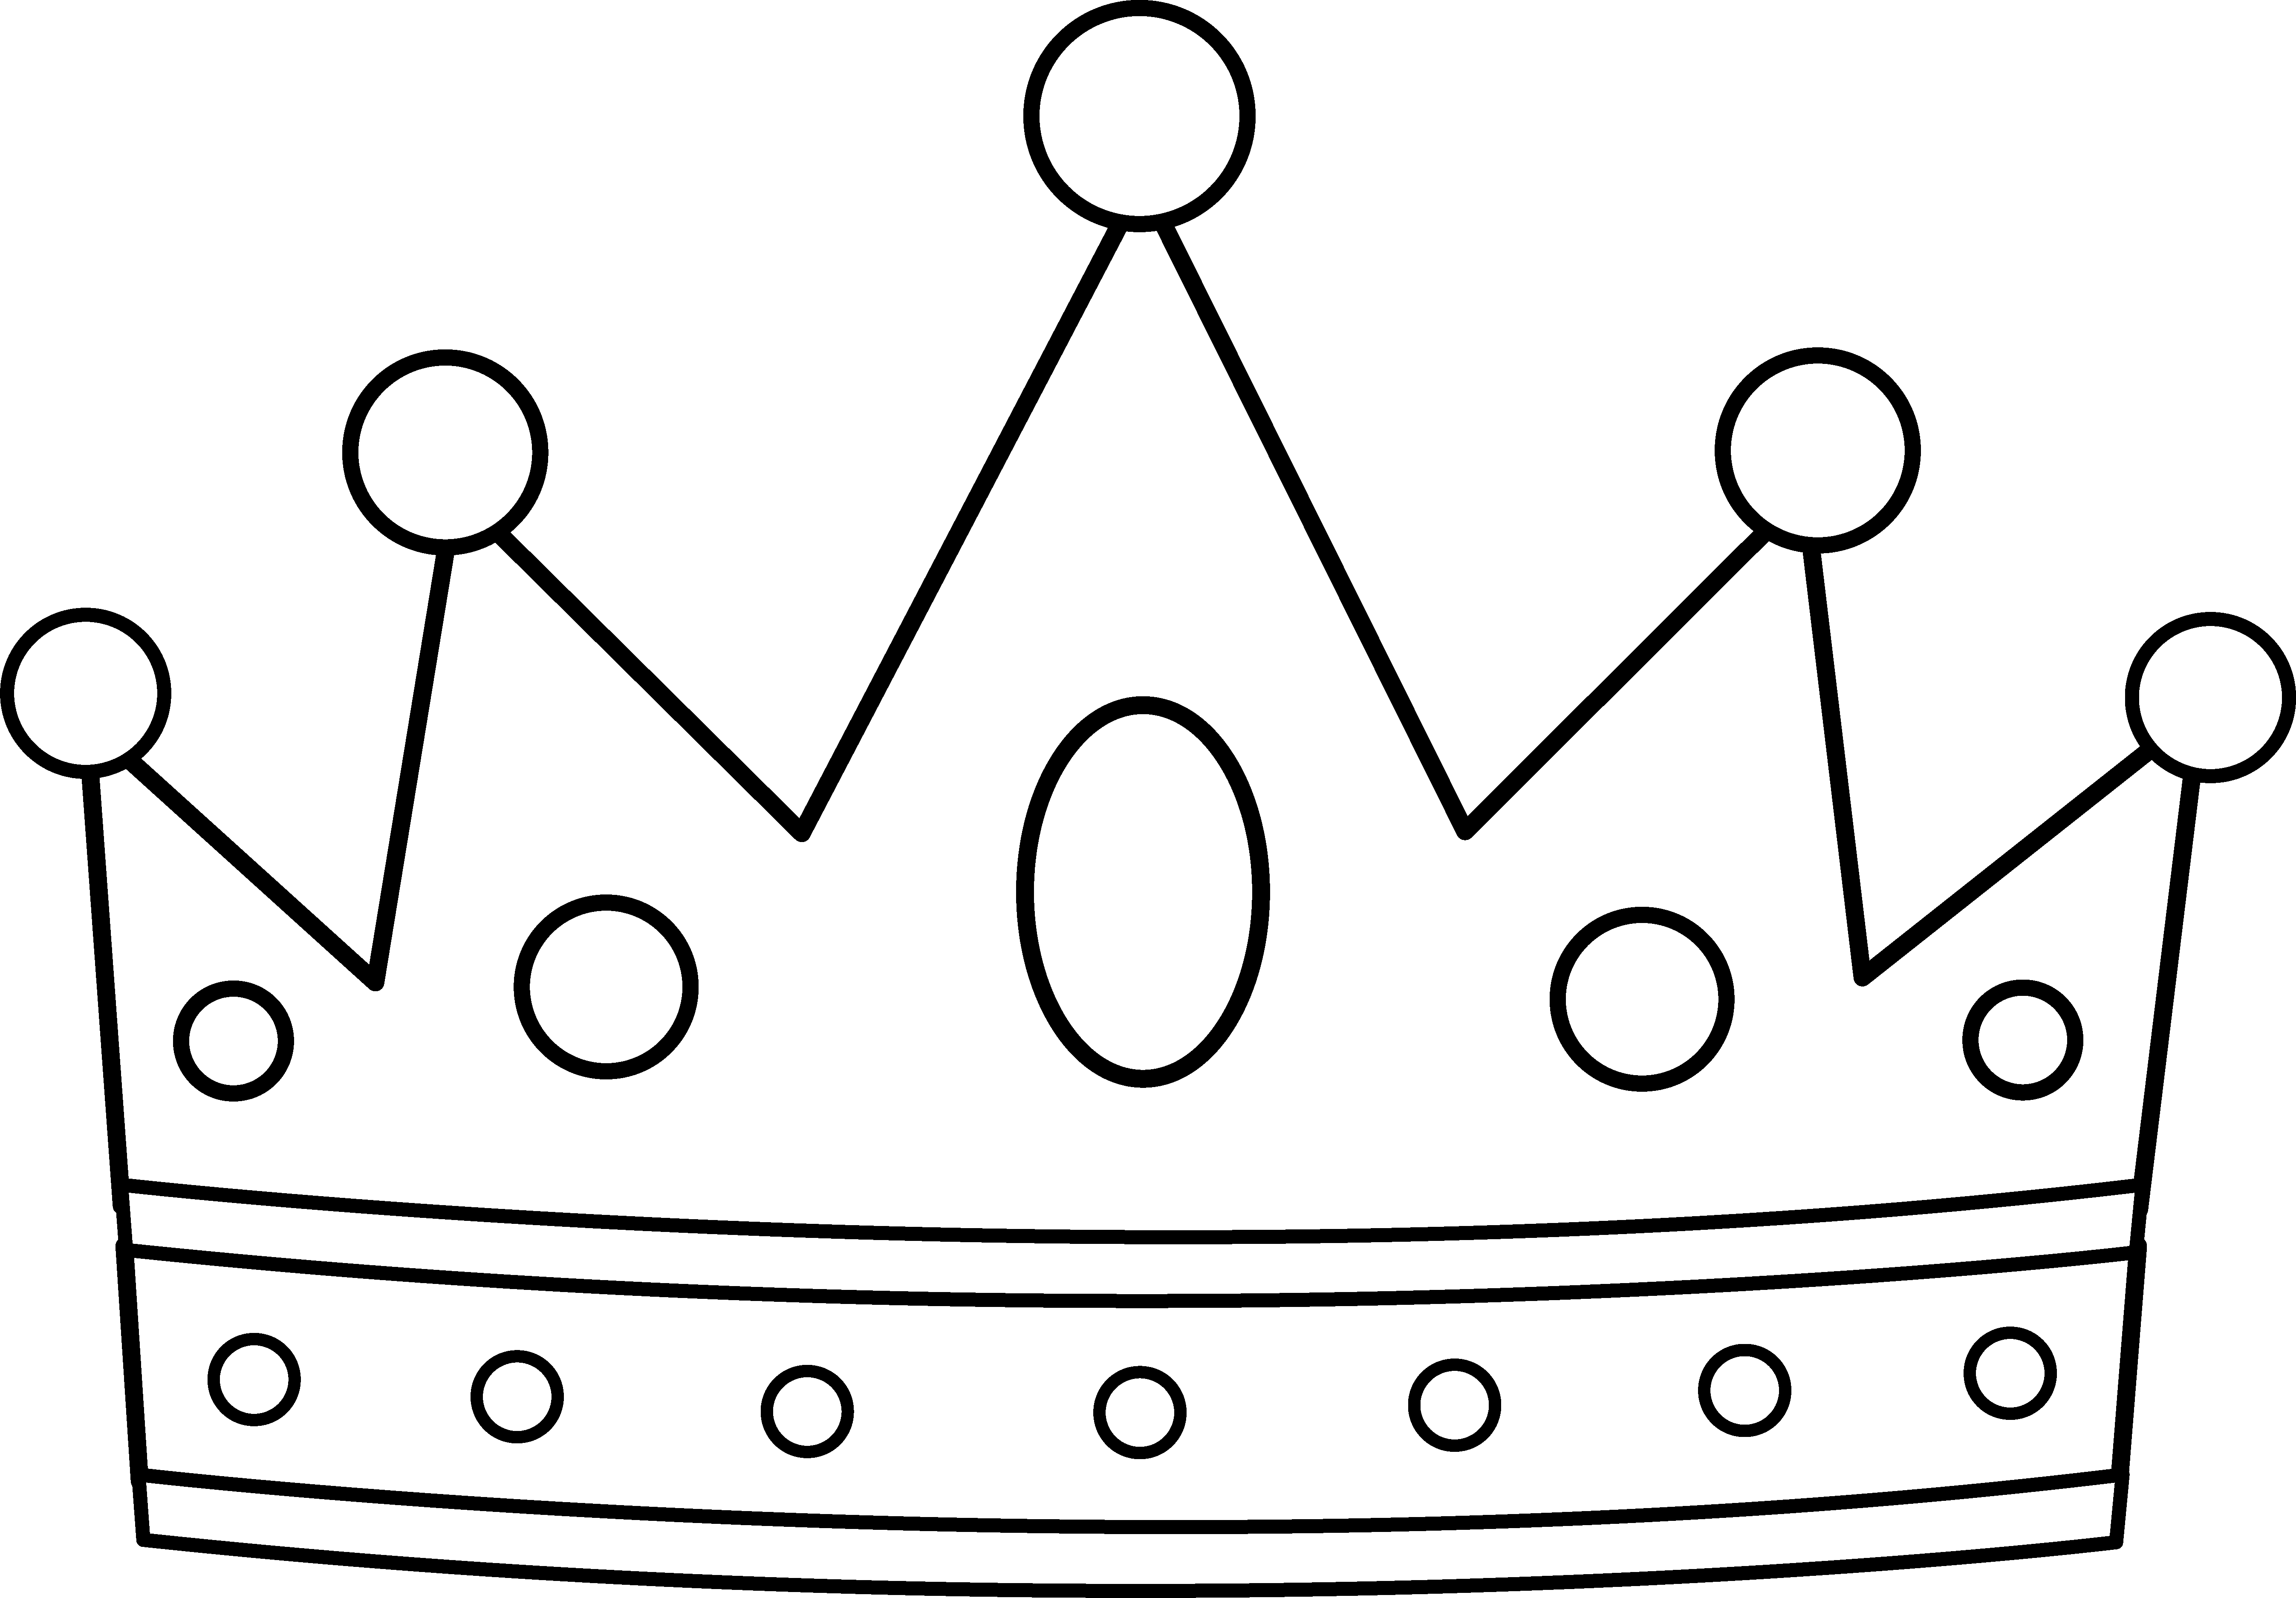 Free Black And White Crown, Download Free Clip Art, Free.